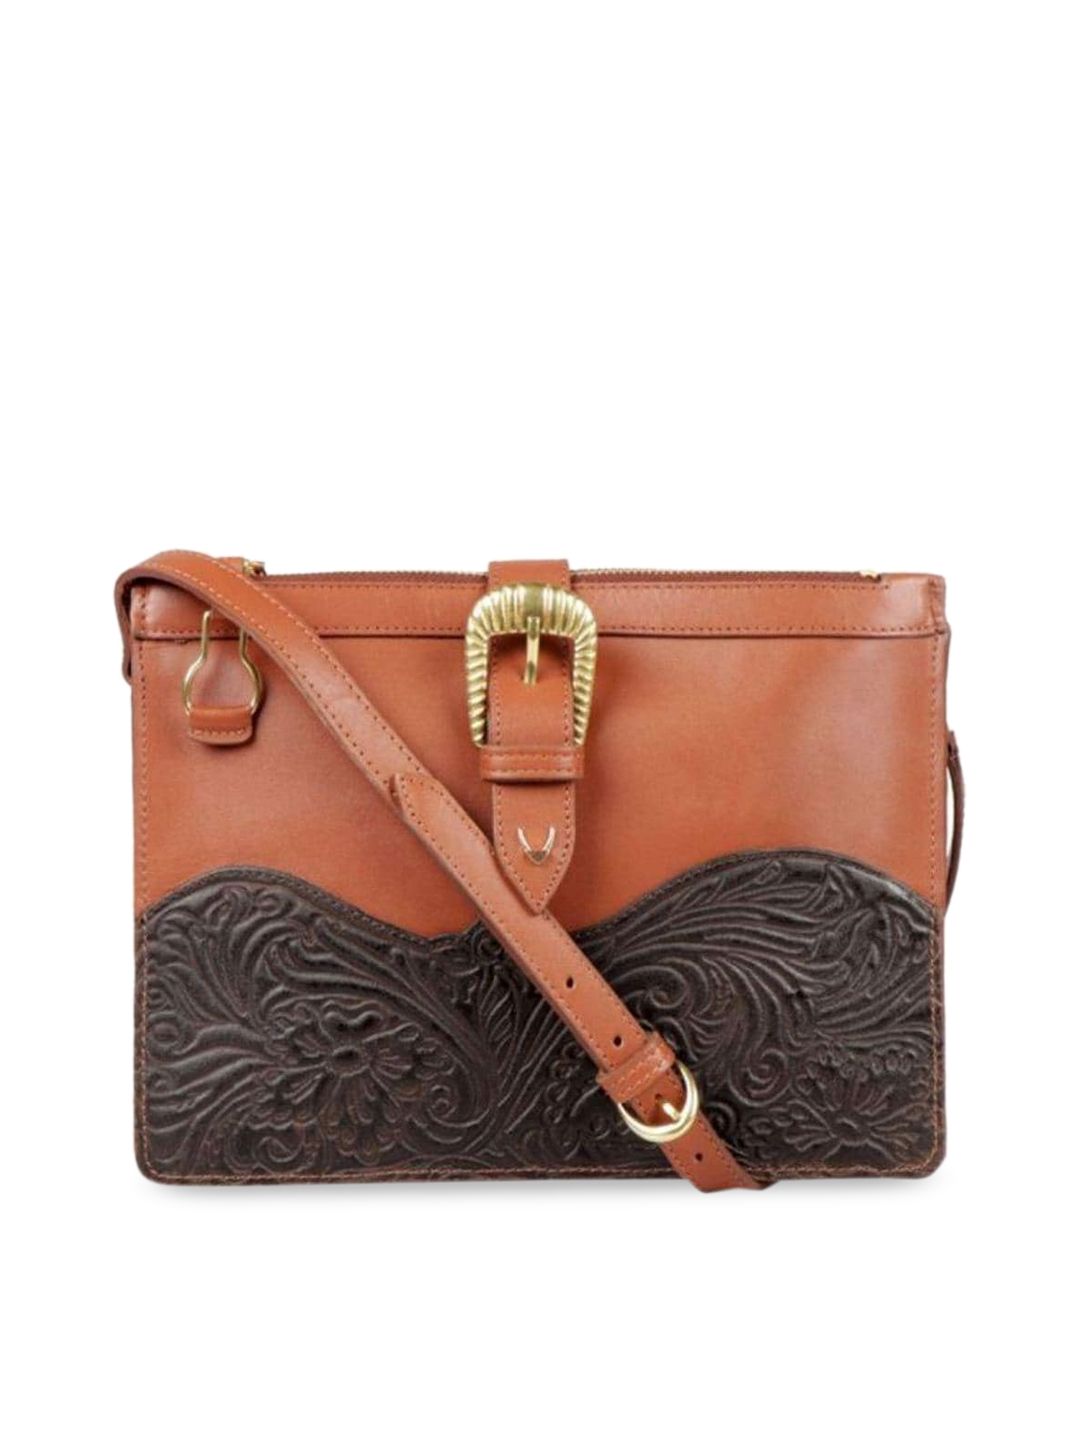 Hidesign Women Tan Leather Structured Sling Bag with Tasselled Price in India